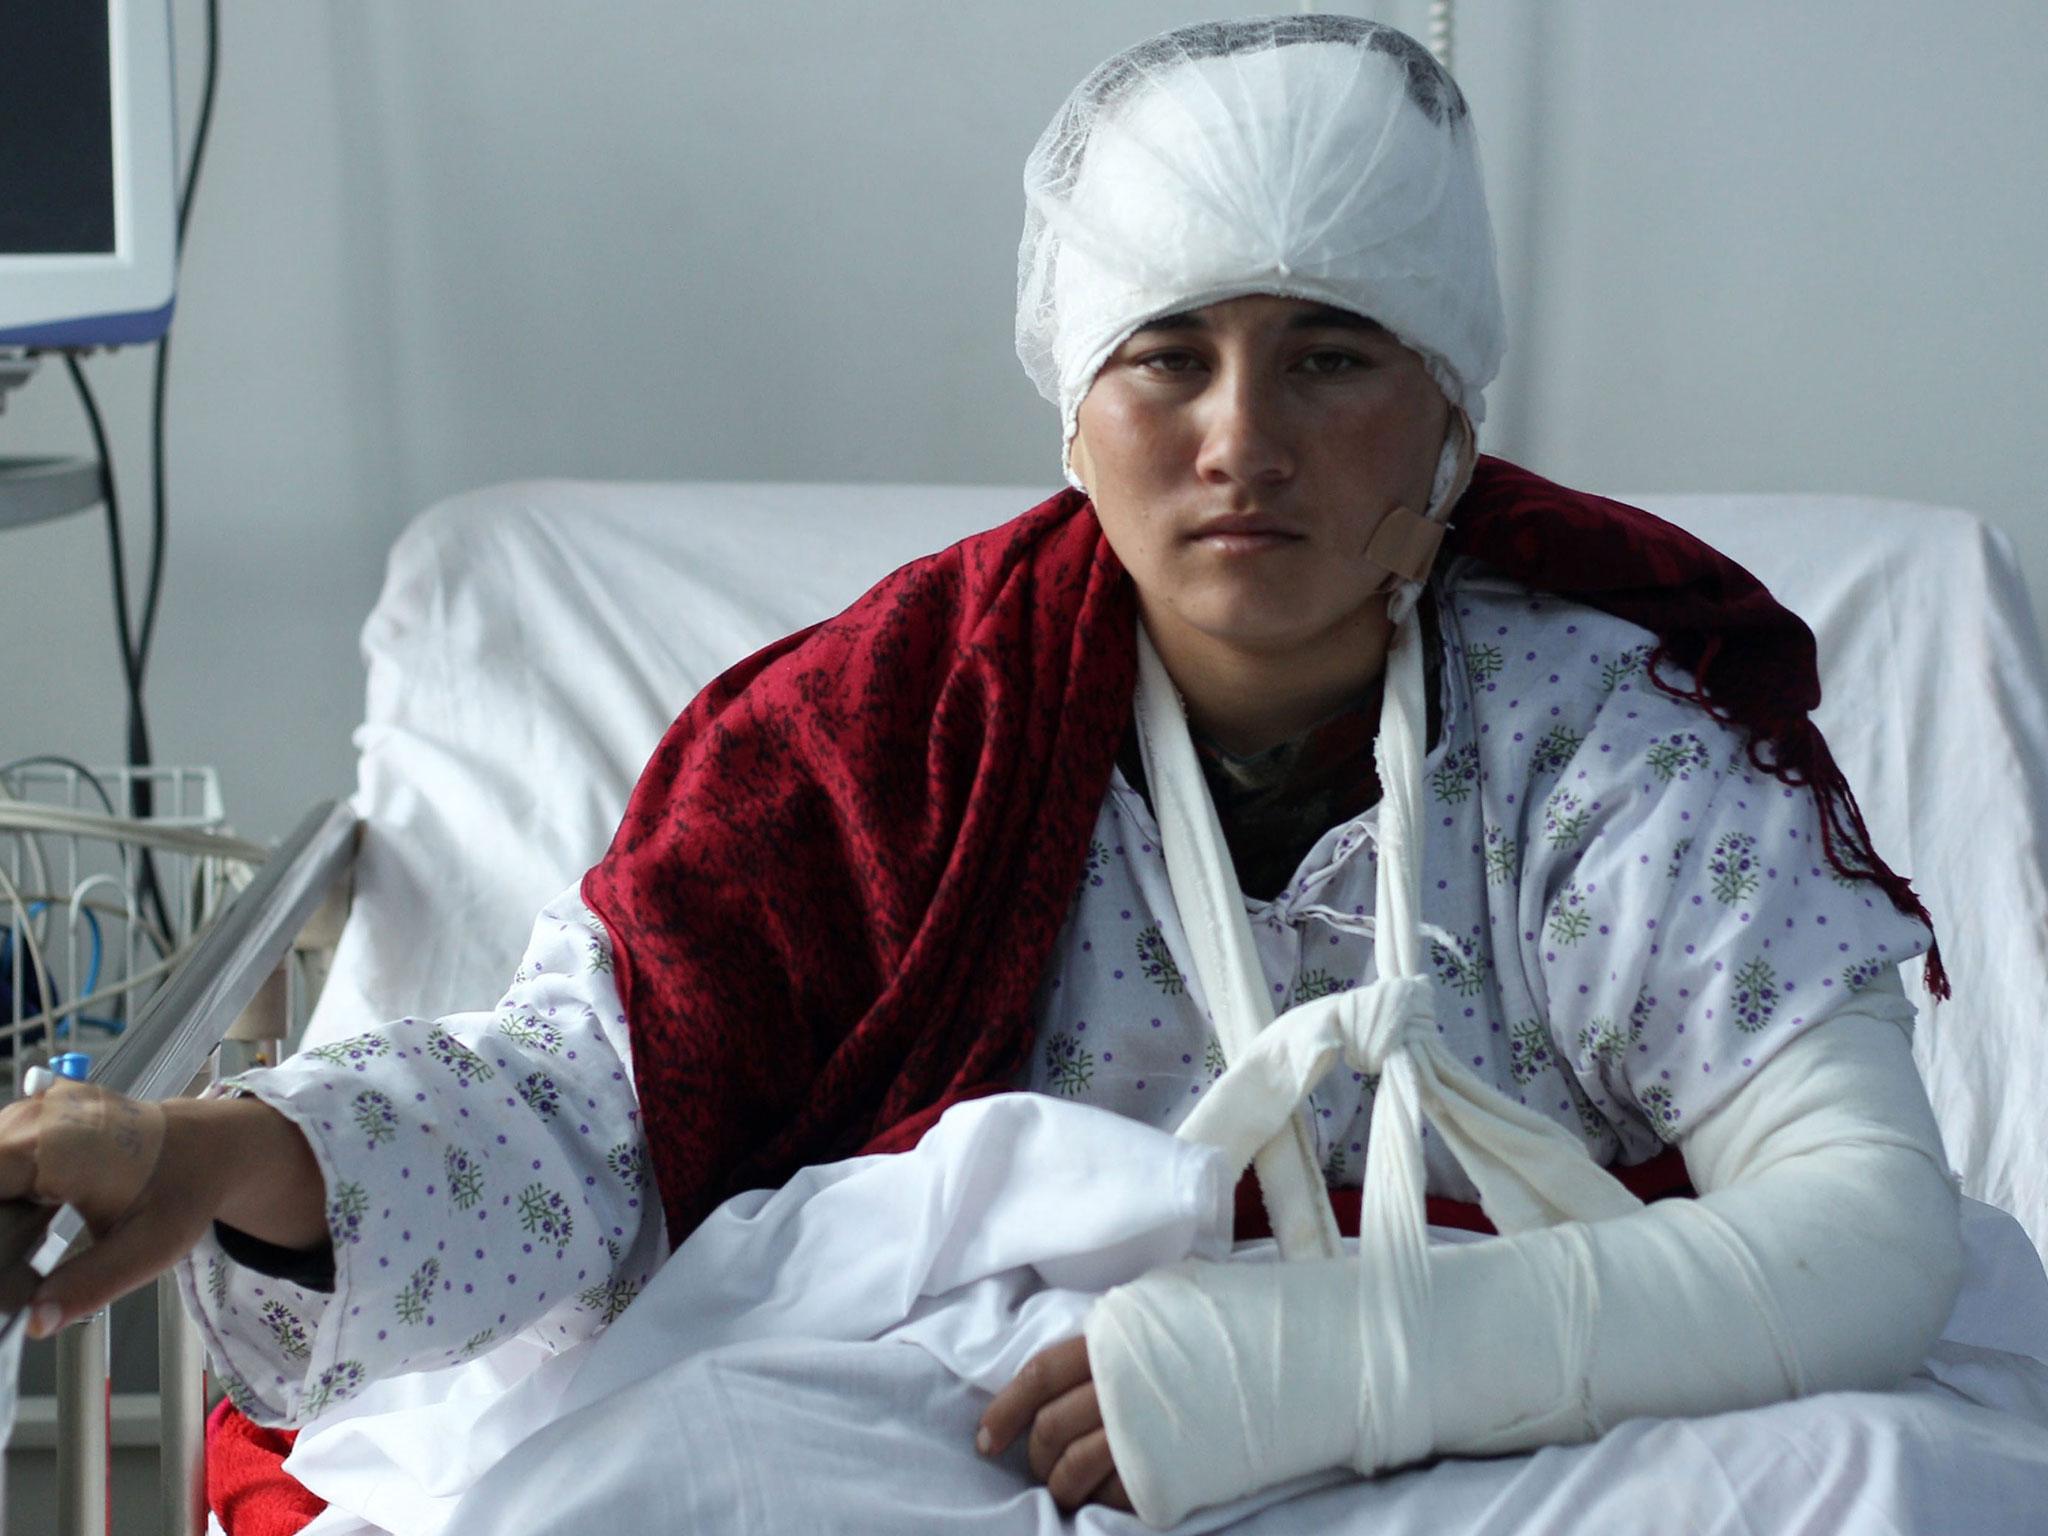 Afghan 23-year old Zarina, whose husband cut off her ears after accusing her of speaking to strange men, receives medical treatment at local hospital in Mazar-e-Sharif, Afghanistan, 3 February, 2017